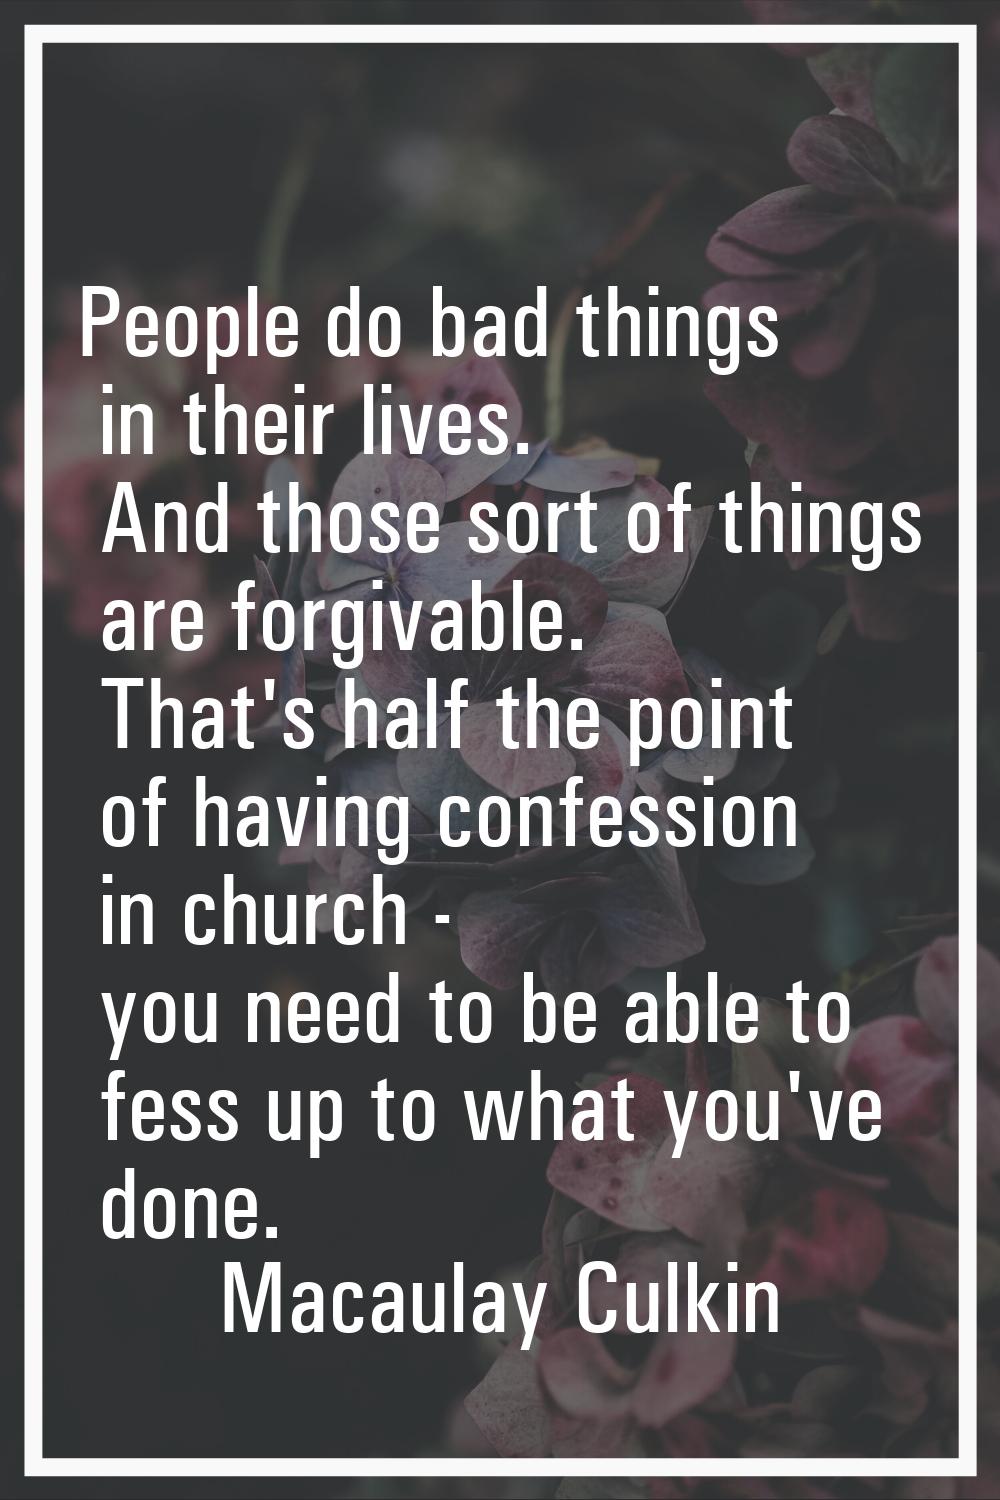 People do bad things in their lives. And those sort of things are forgivable. That's half the point